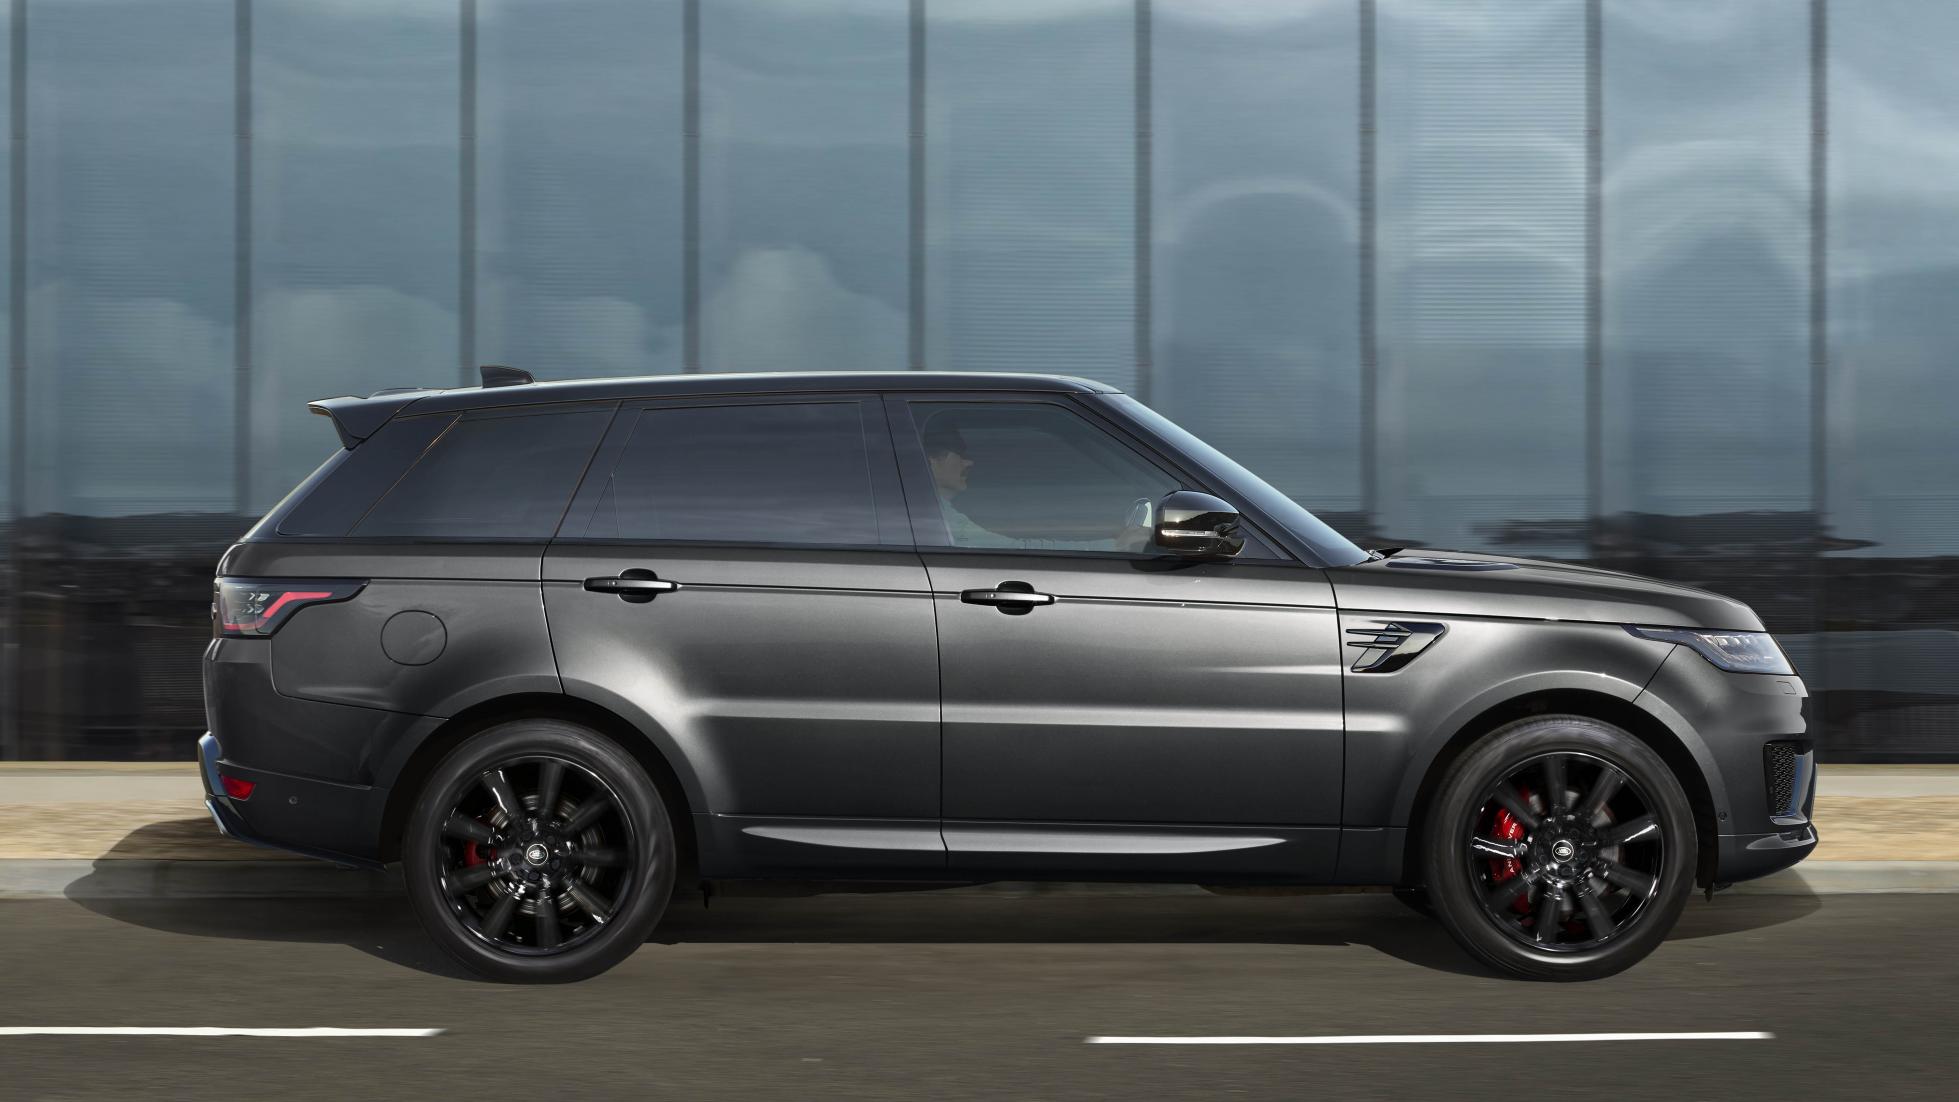 TopGear | This is the new Range Rover Sport Black edition